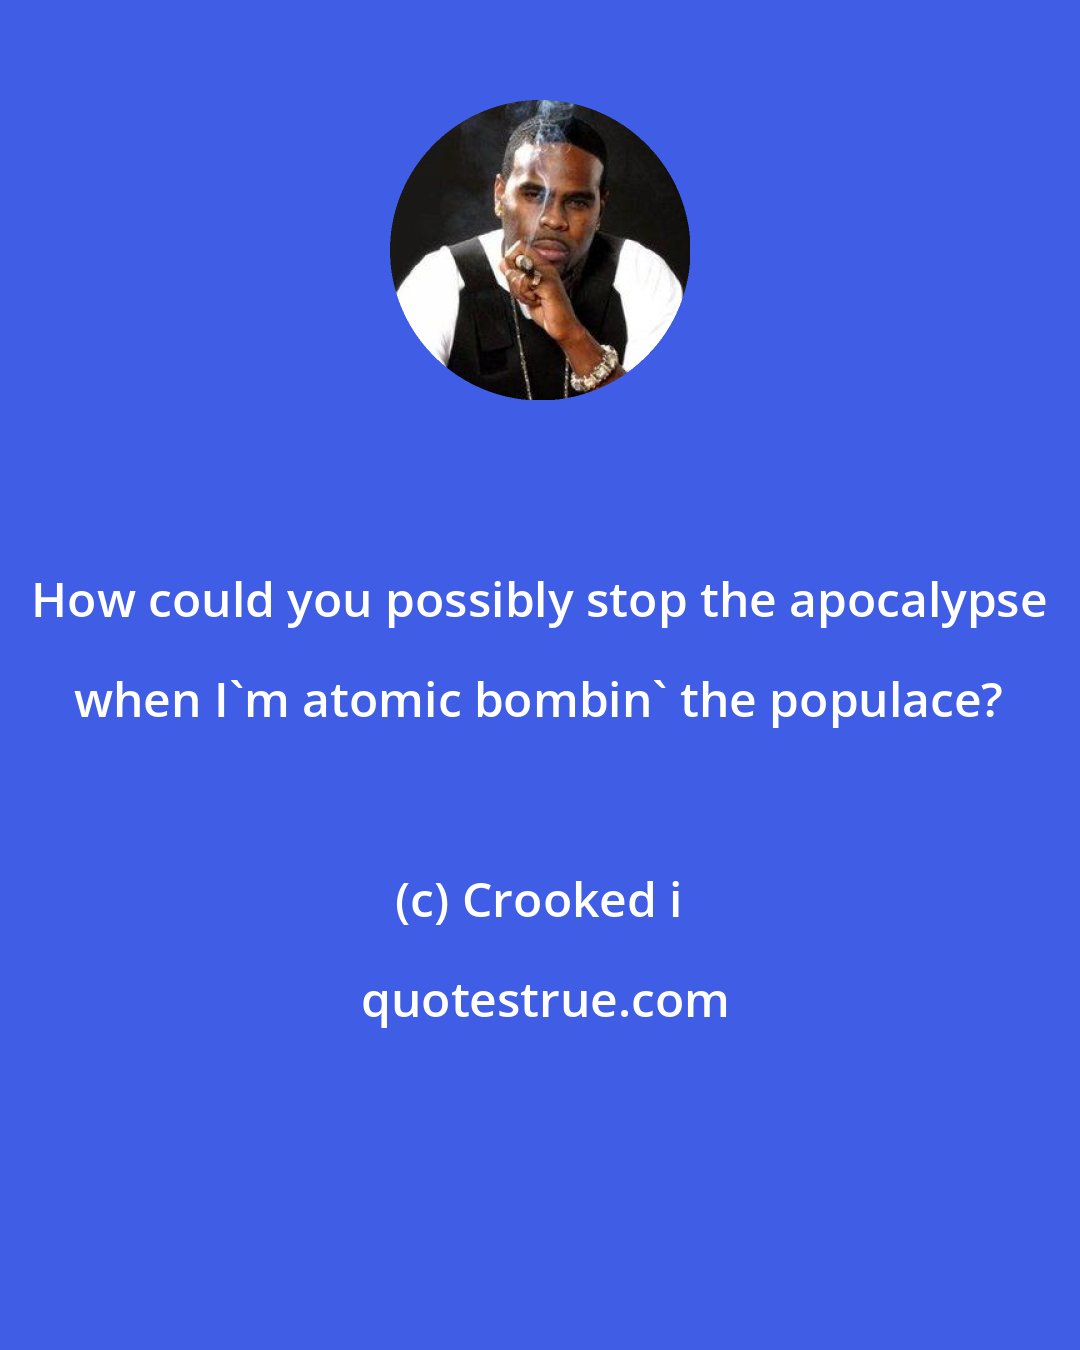 Crooked i: How could you possibly stop the apocalypse when I'm atomic bombin' the populace?